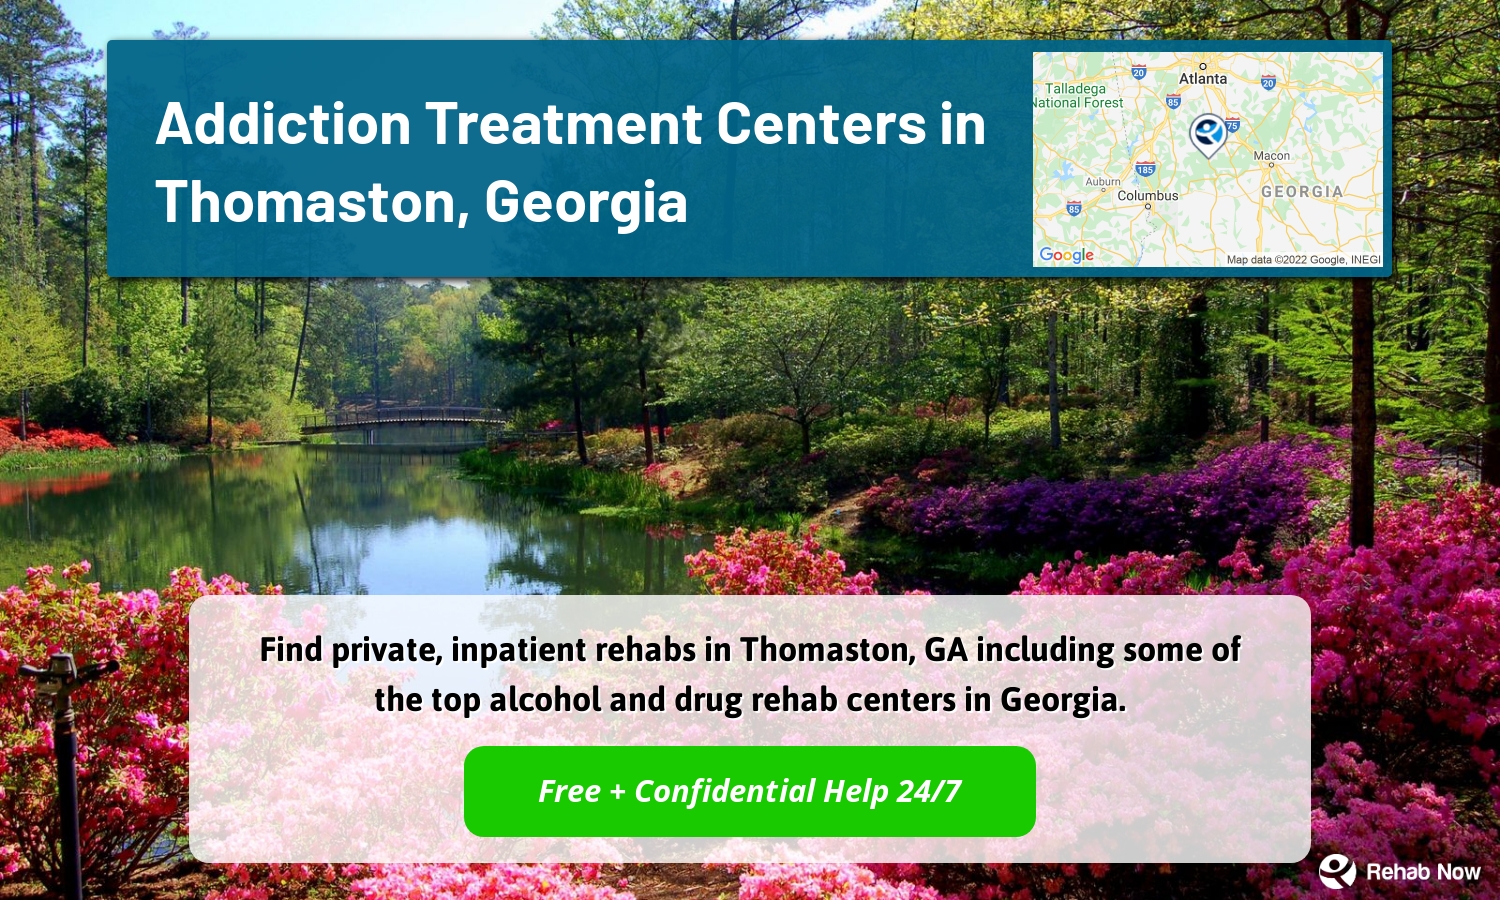 Find private, inpatient rehabs in Thomaston, GA including some of the top alcohol and drug rehab centers in Georgia.